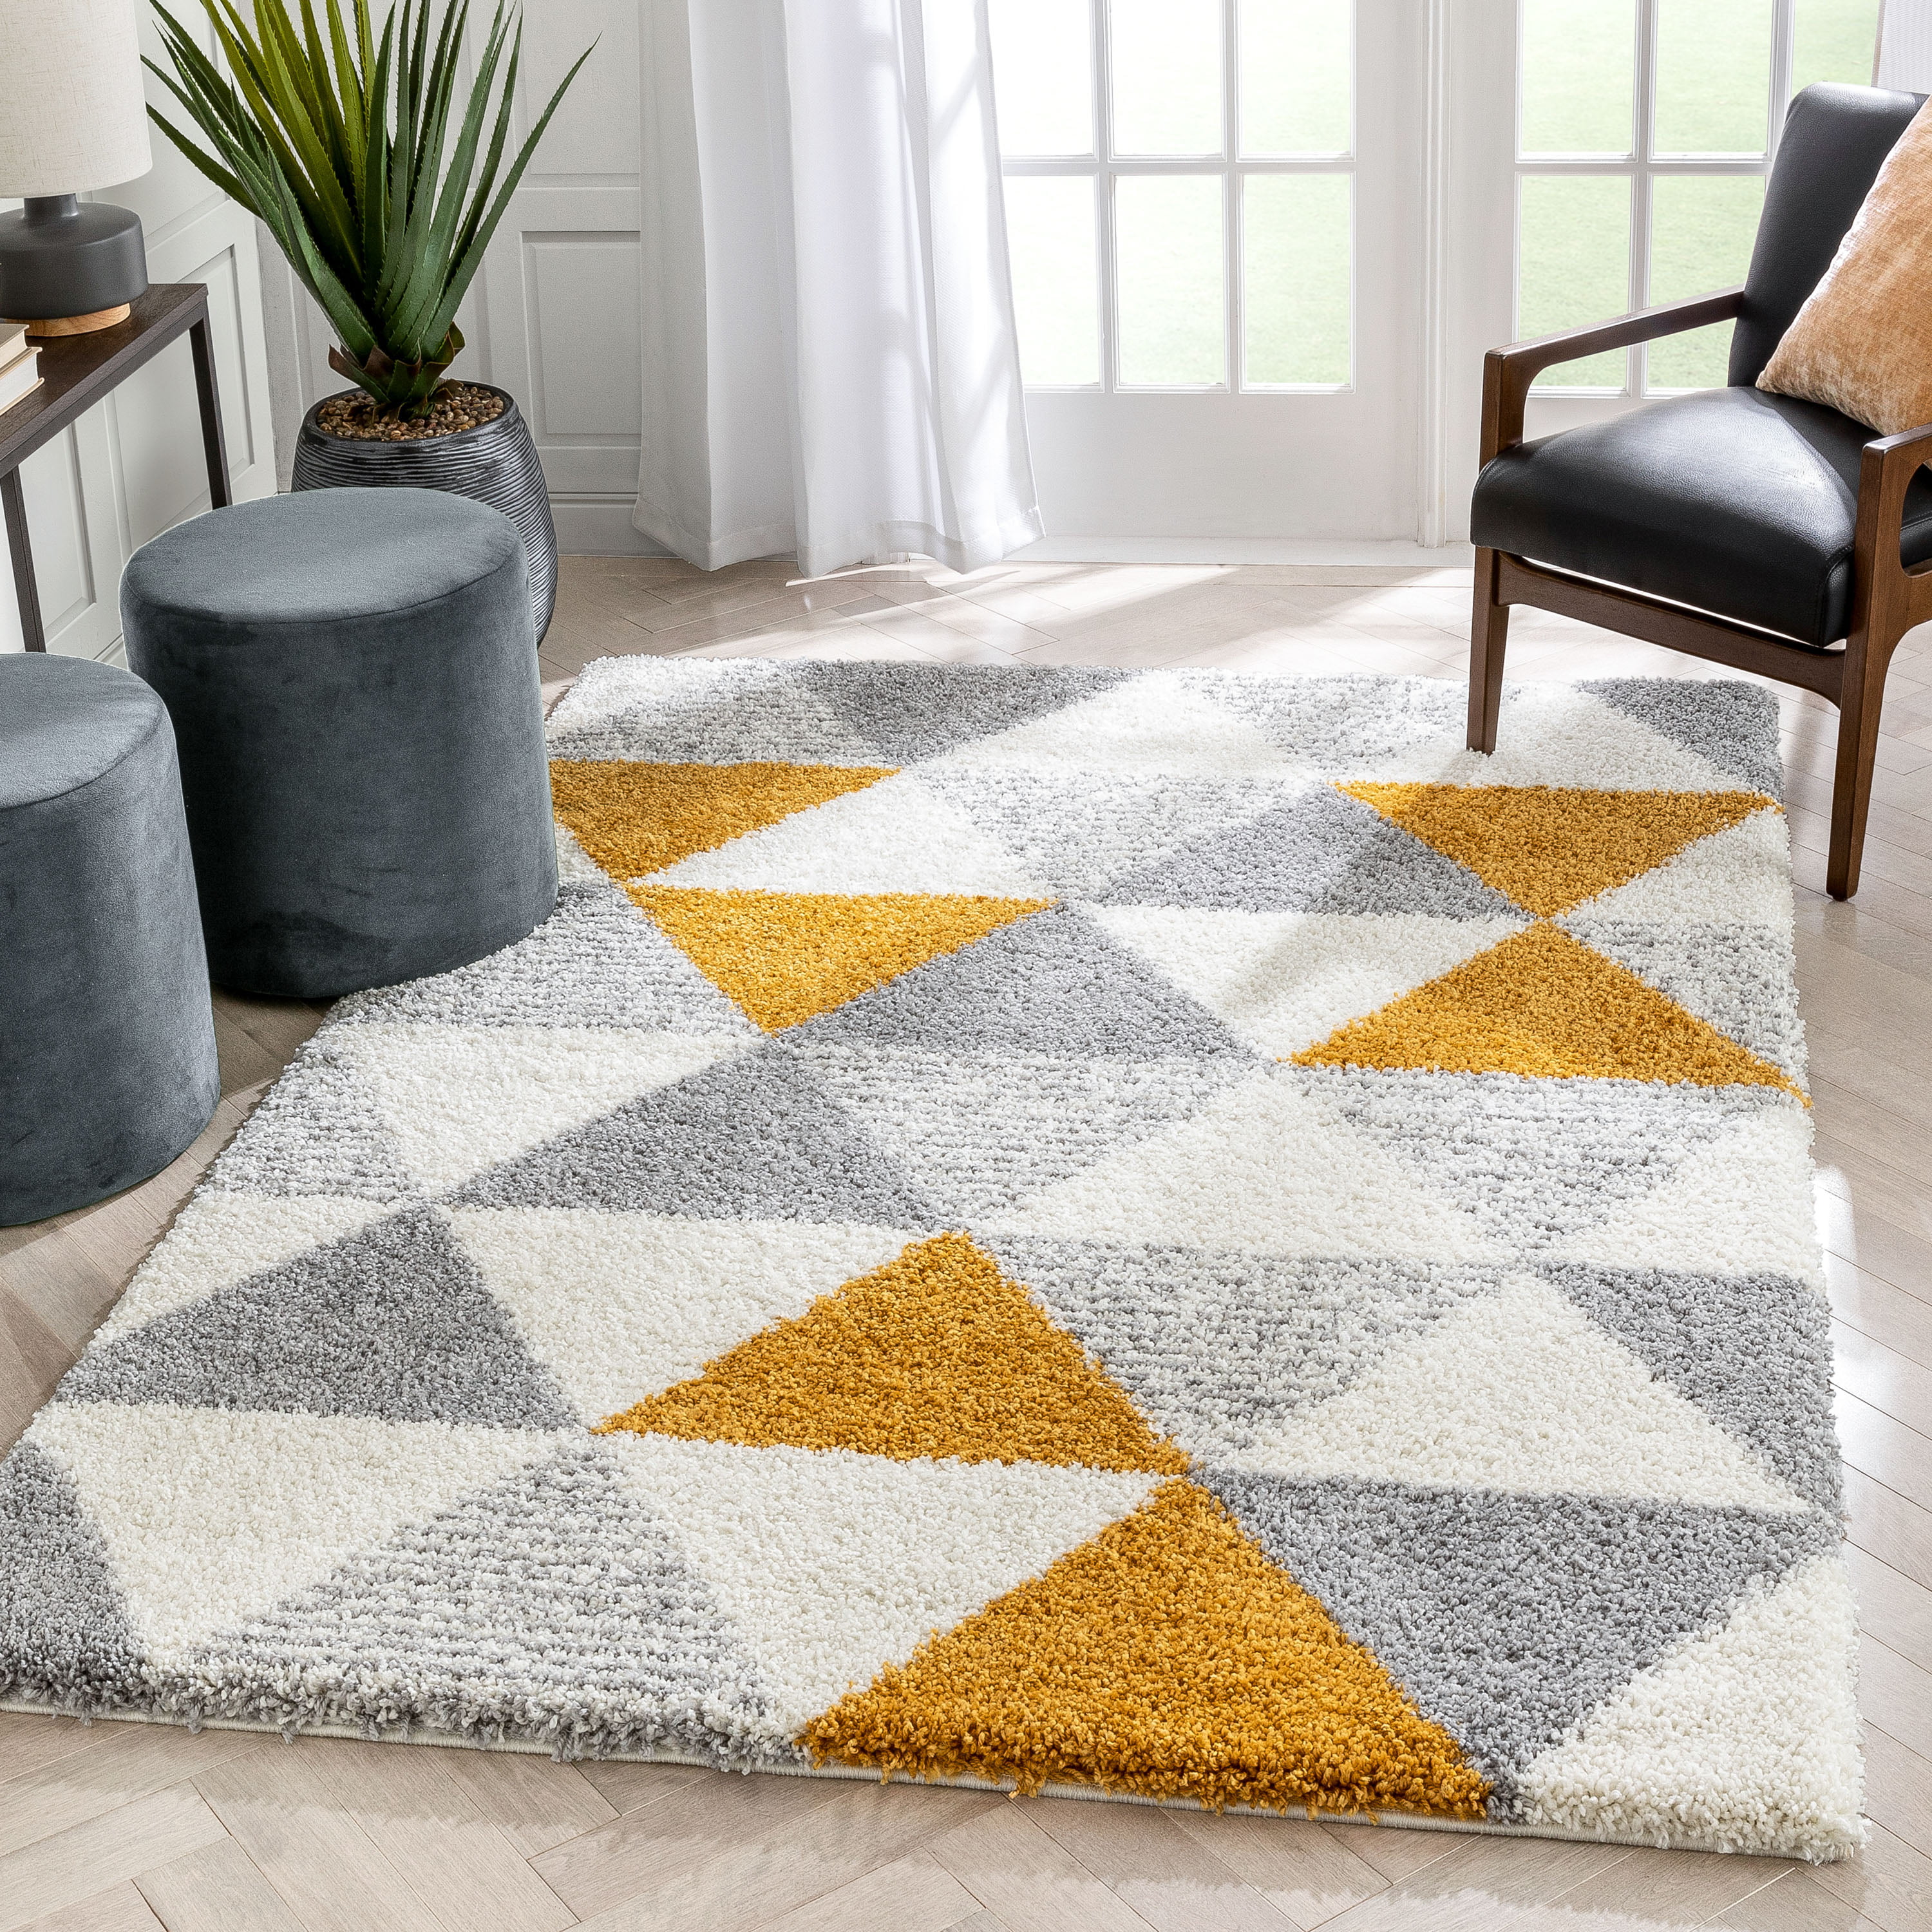 La Dole Rugs Gold Grey Ivory Abstract Spirals Waves Modern Geometric Pattern Area Rug for Living Room Bedroom Hallway Carpet 7'10 X 10'5 